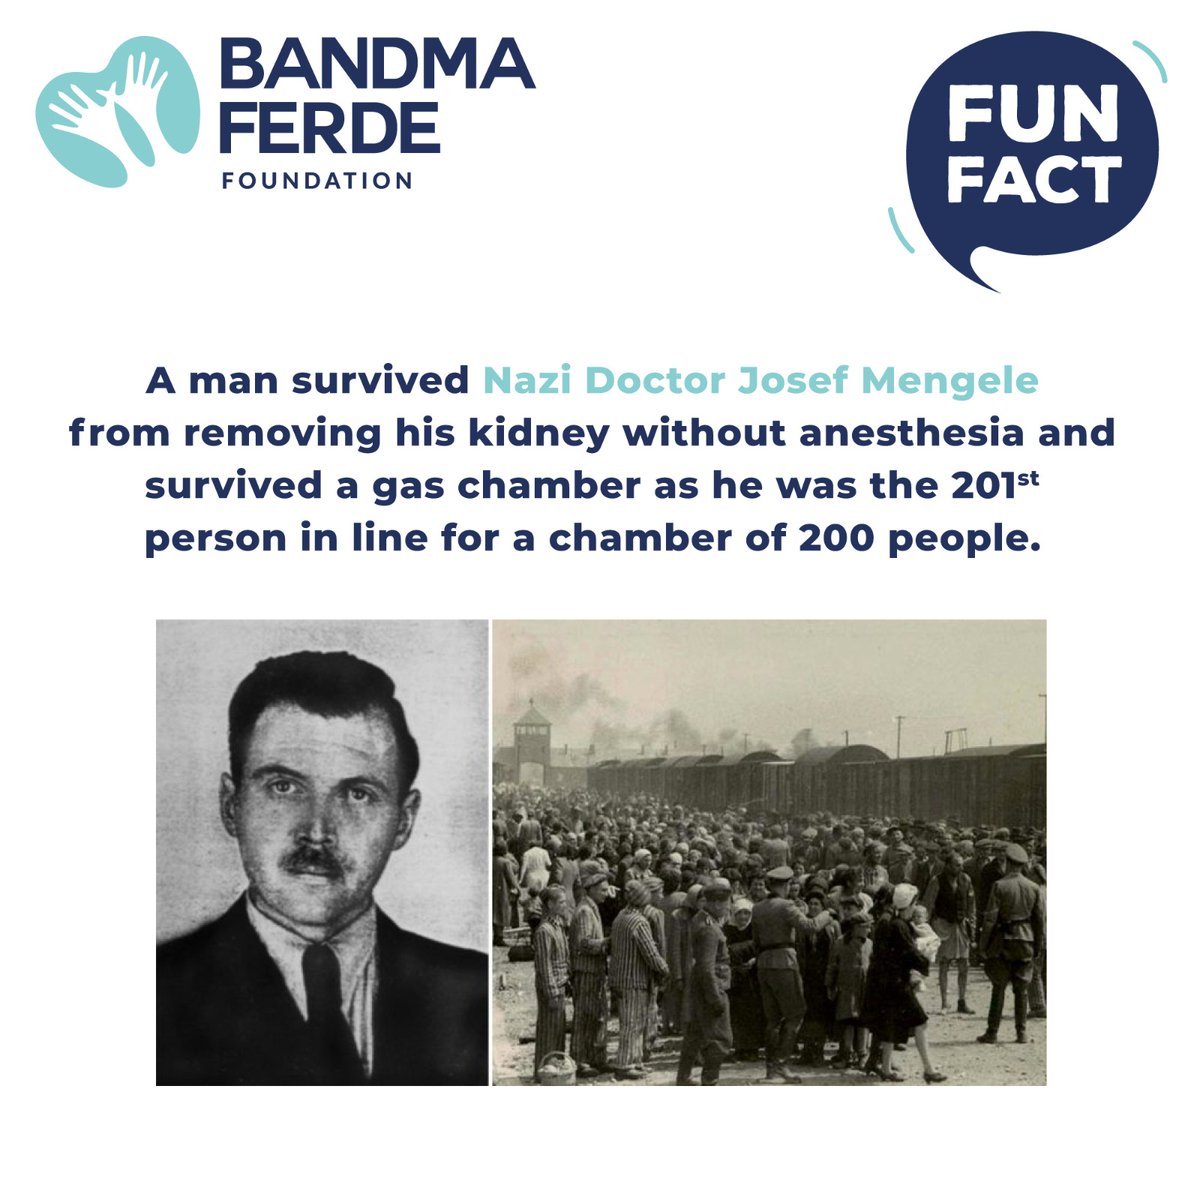 𝐅𝐮𝐧 𝐅𝐚𝐜𝐭: A man survived Nazi Doctor Josef Mengele from removing his kidney without anesthesia and survived a gas chamber as he was the 201st person in line for a chamber of 200 people. #Bandmaferdefoundation #Bandmaferde #NGOIndia #nonprofitorganizationindia #funfacts